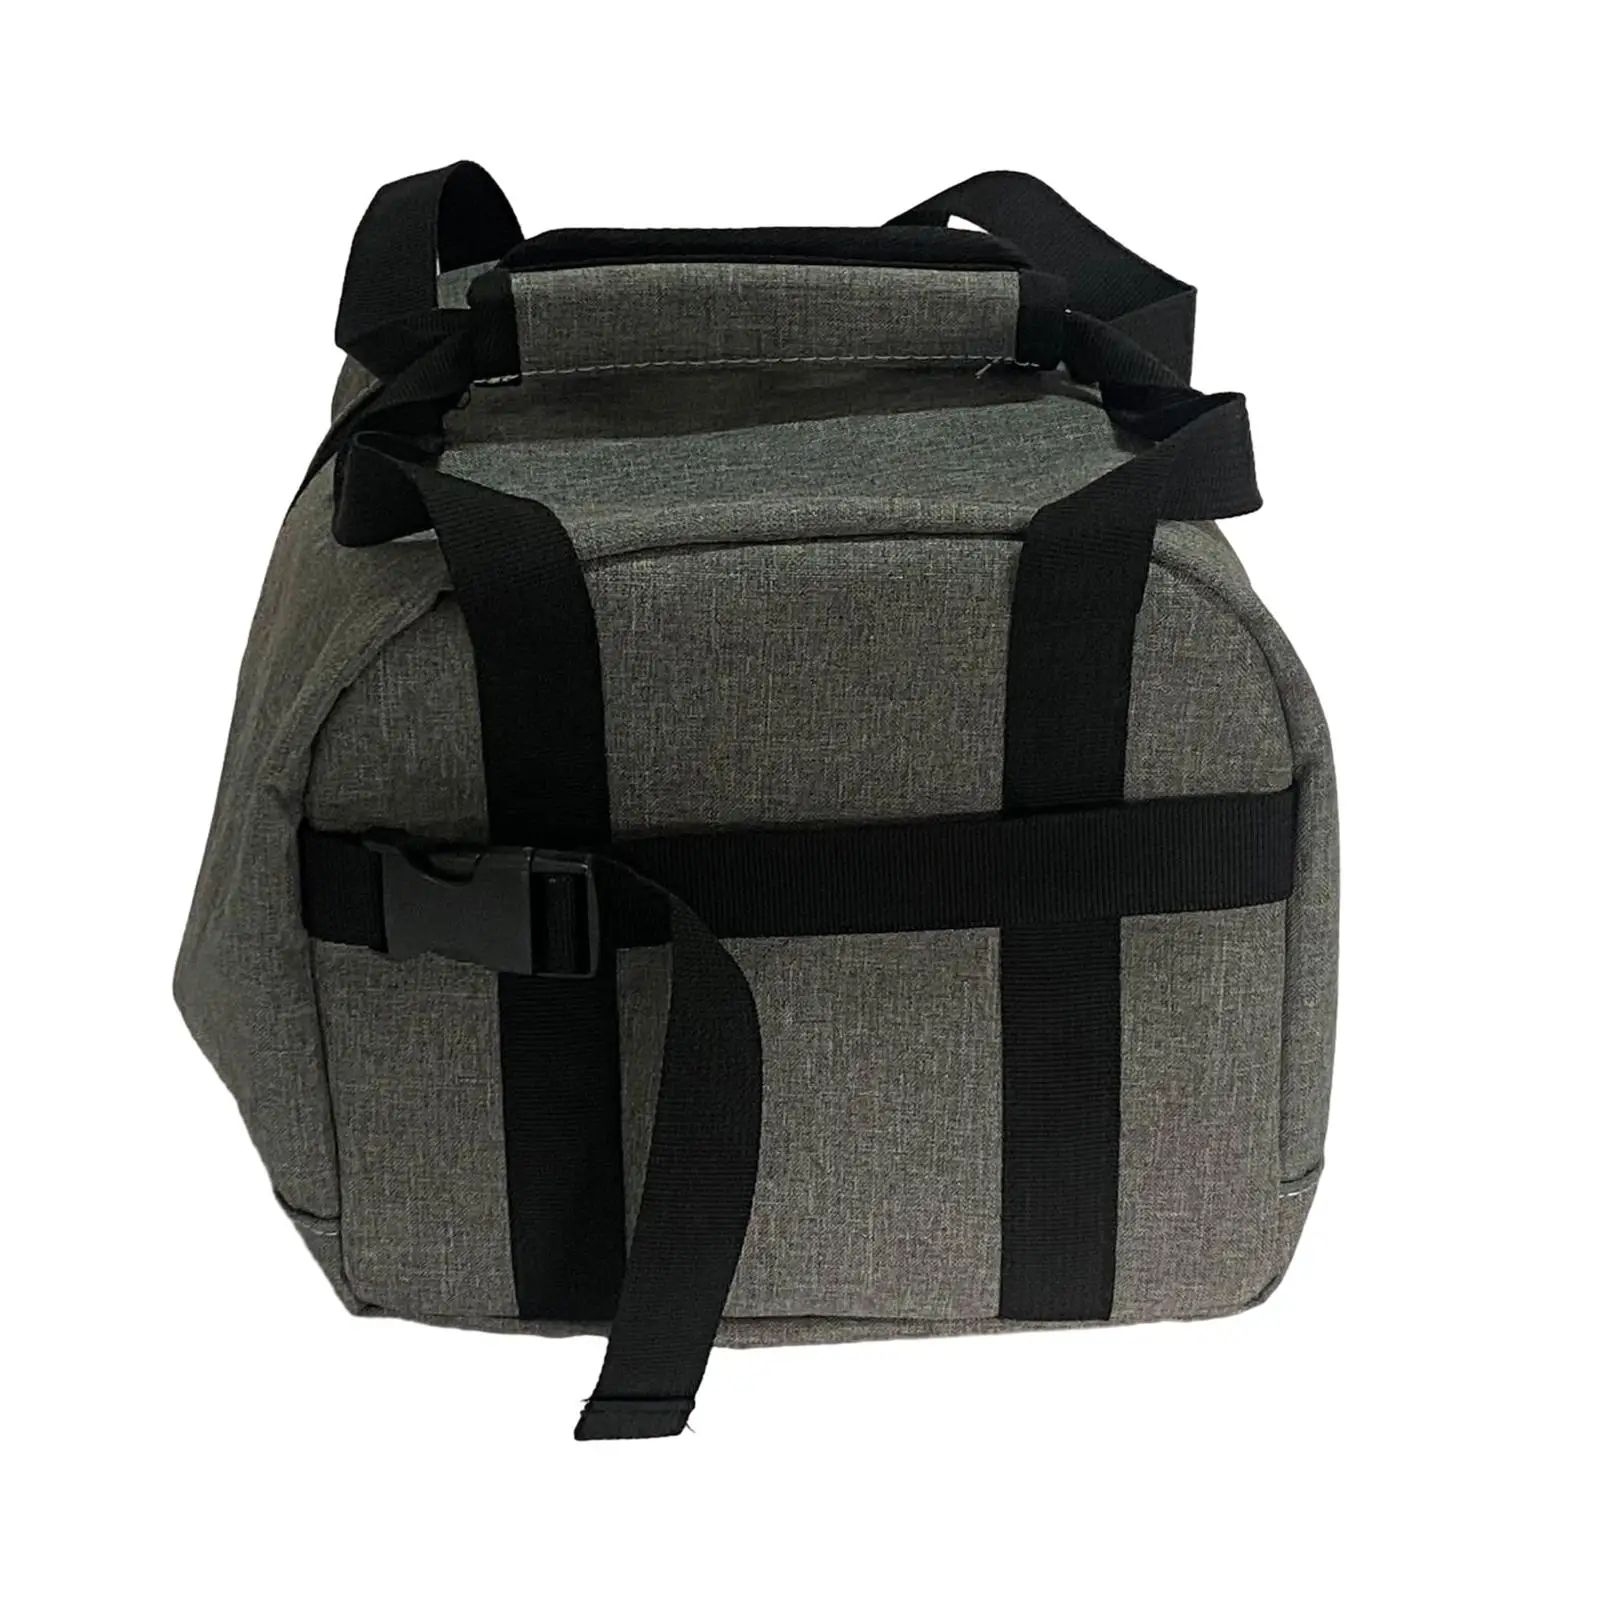 Single Bowling Ball Bag Carrying Bag Oxford Cloth Compact with Handle with External Mesh Pocket Bowling Tote Bowling Accessories